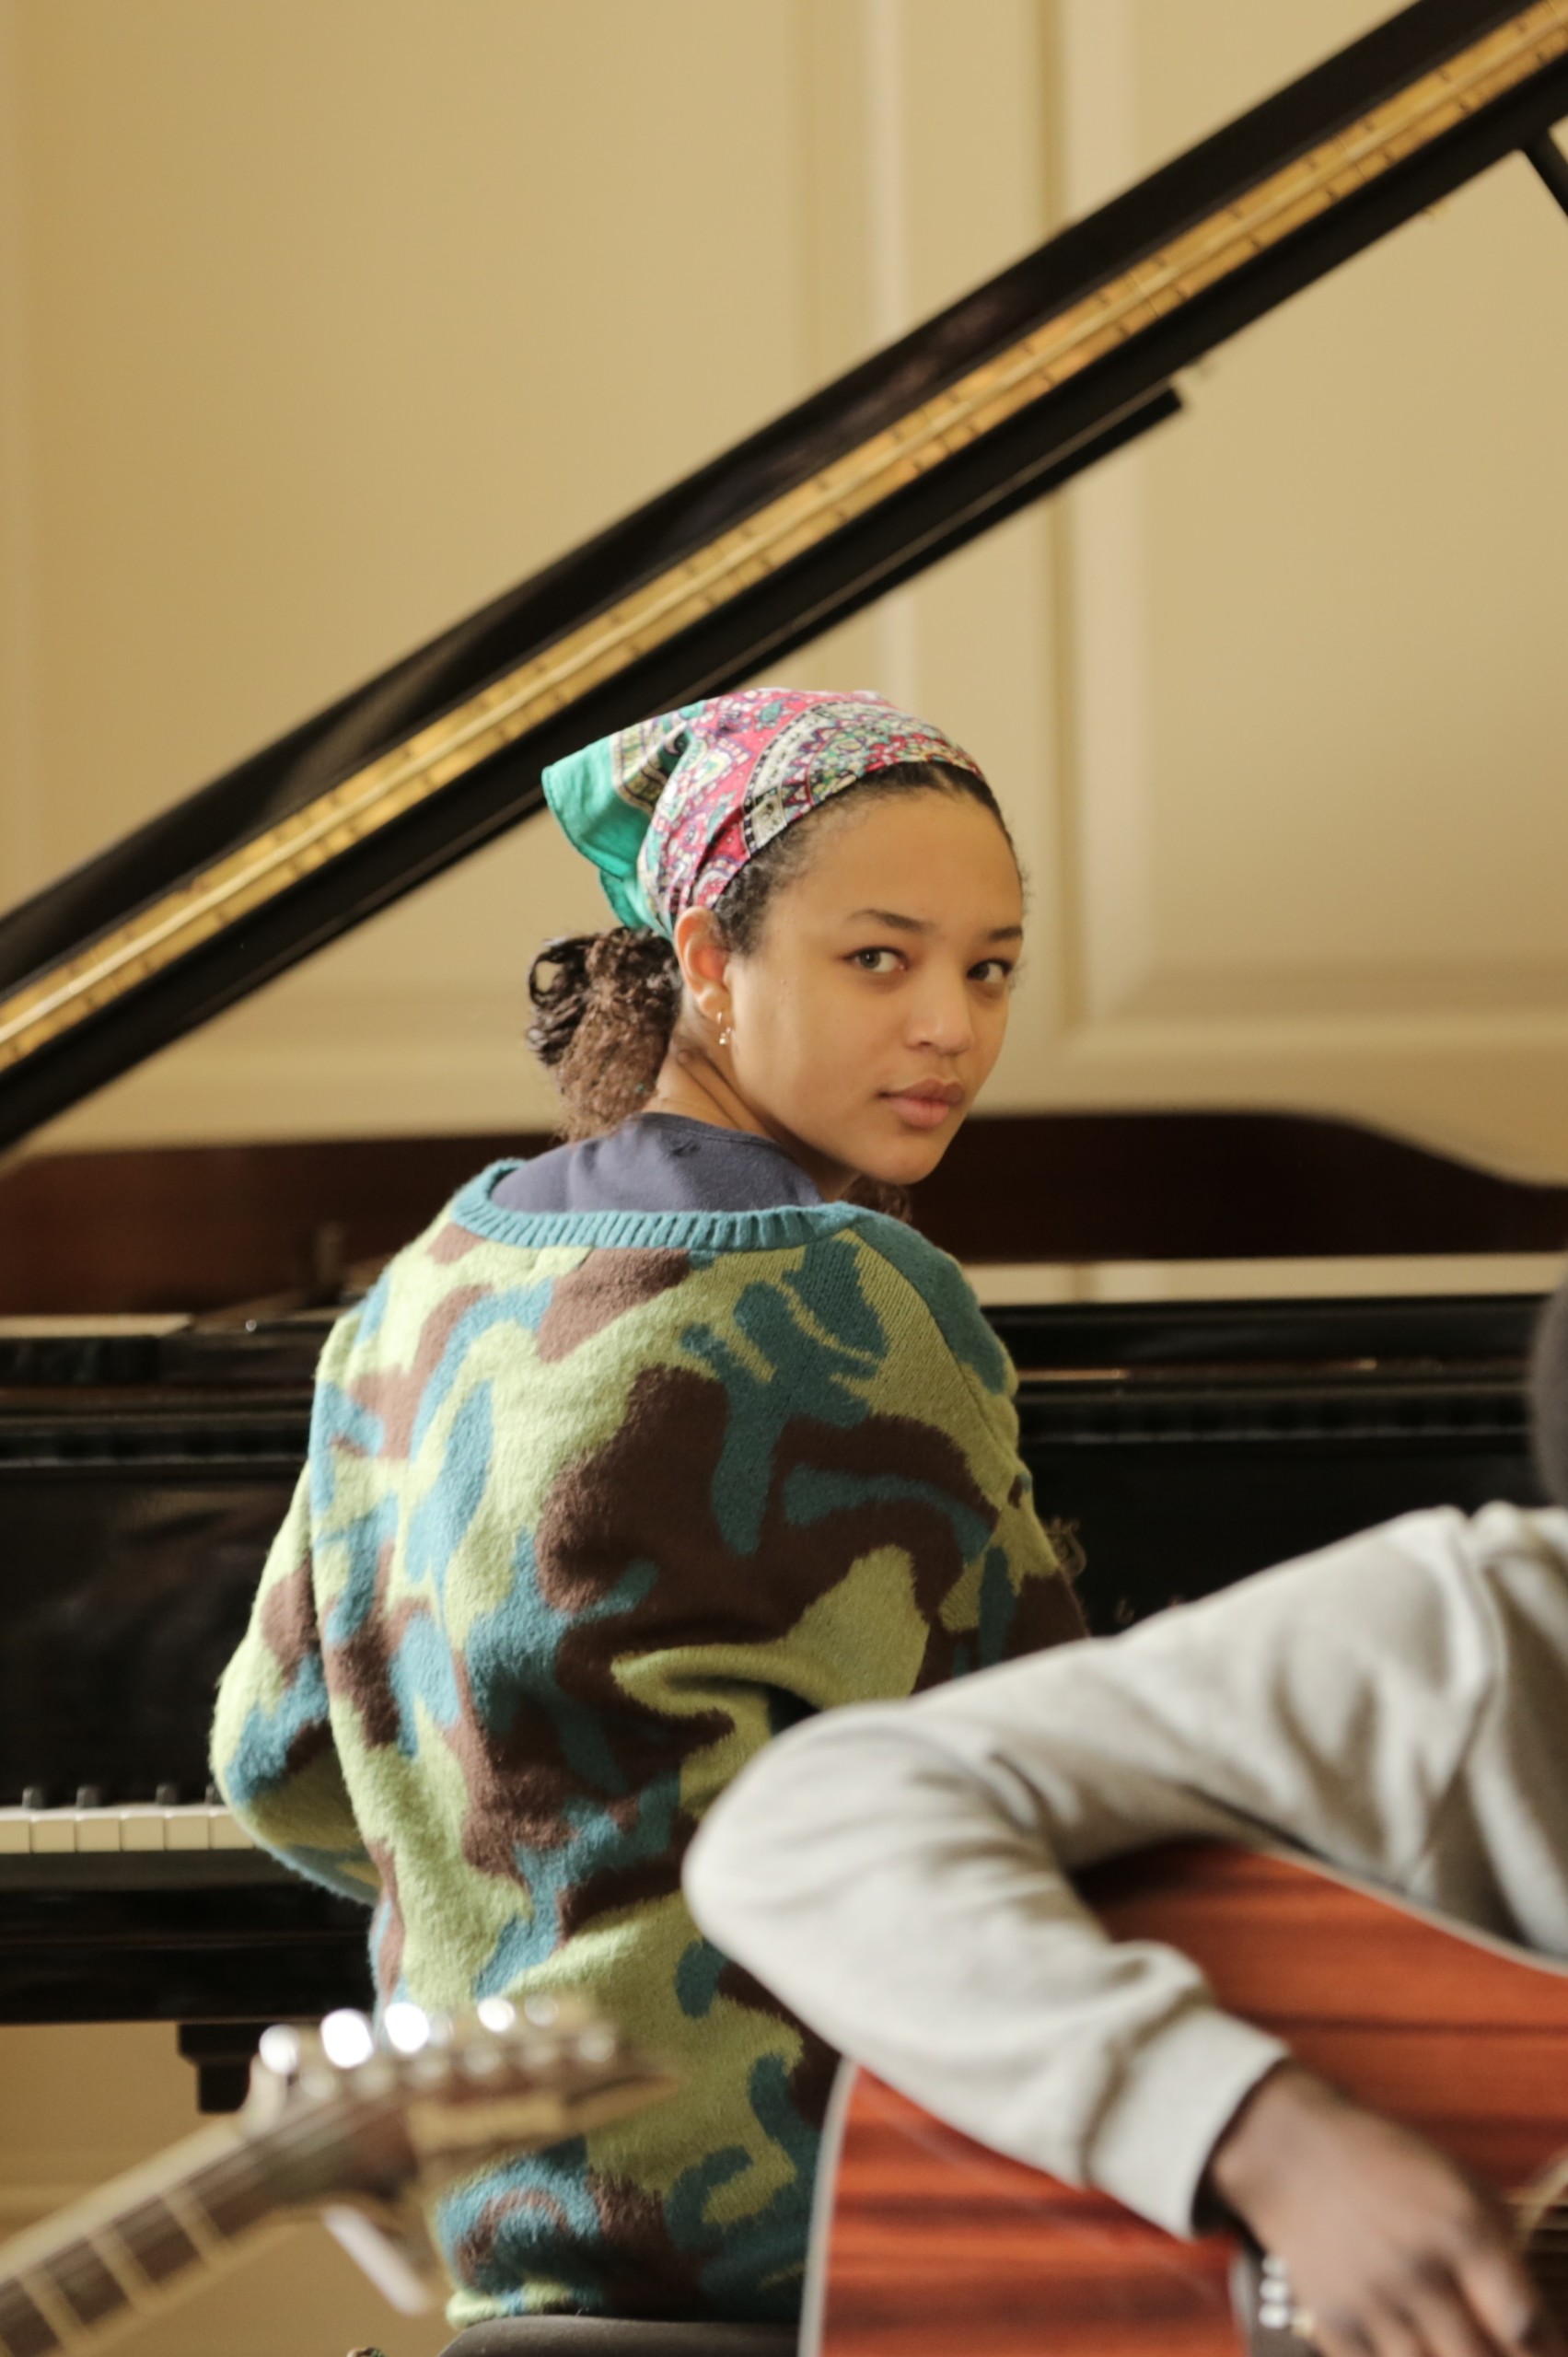 A young musician playing the piano